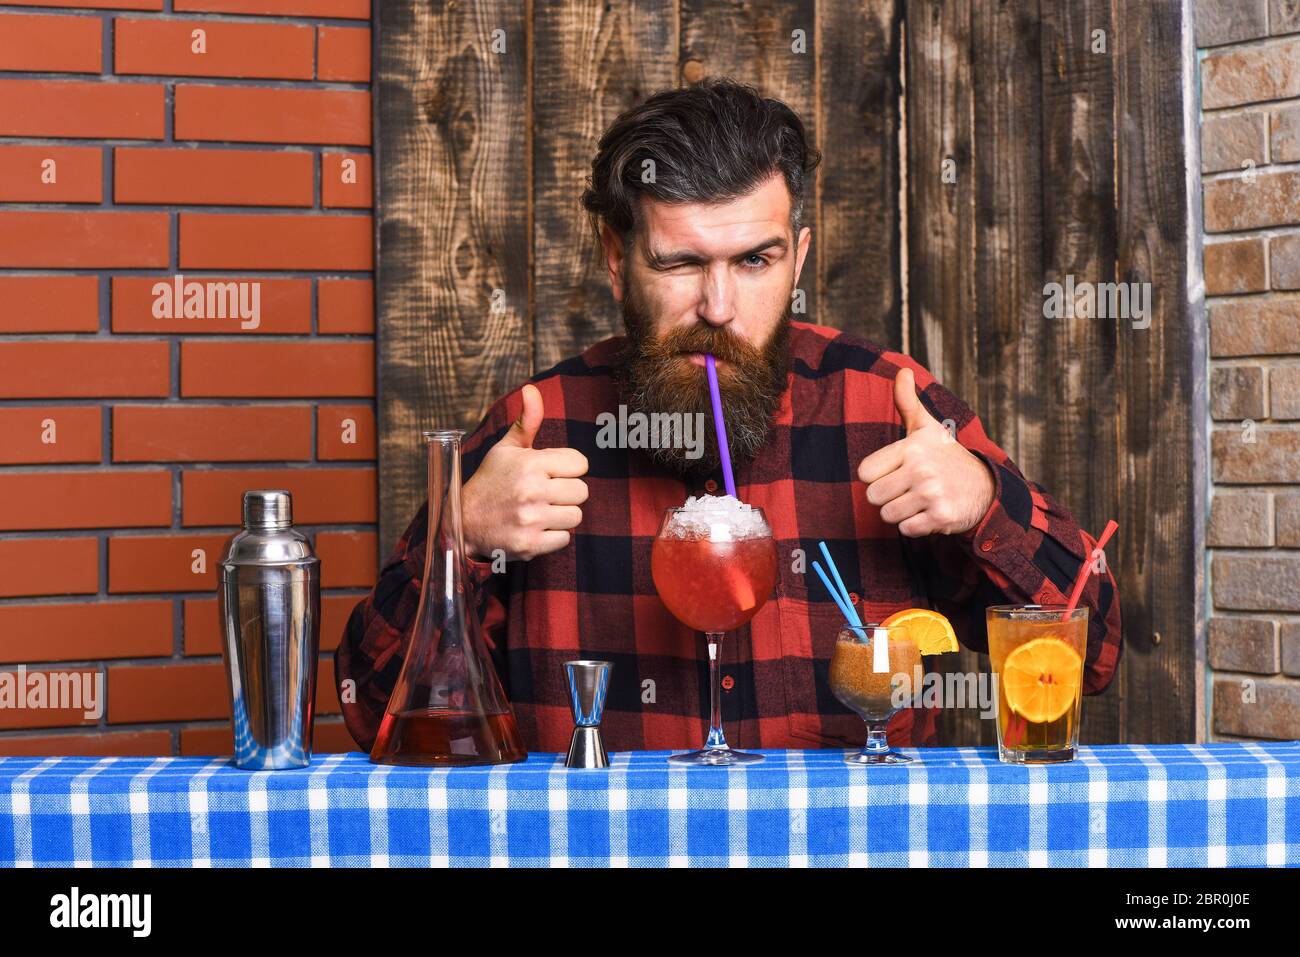 Hipster enjoy drink and thumbs up. Barman with beard and cheerful face drinks out of glass with drinking straw cocktail. Man in checkered shirt on wooden background. Barman and cocktails concept. Stock Photo